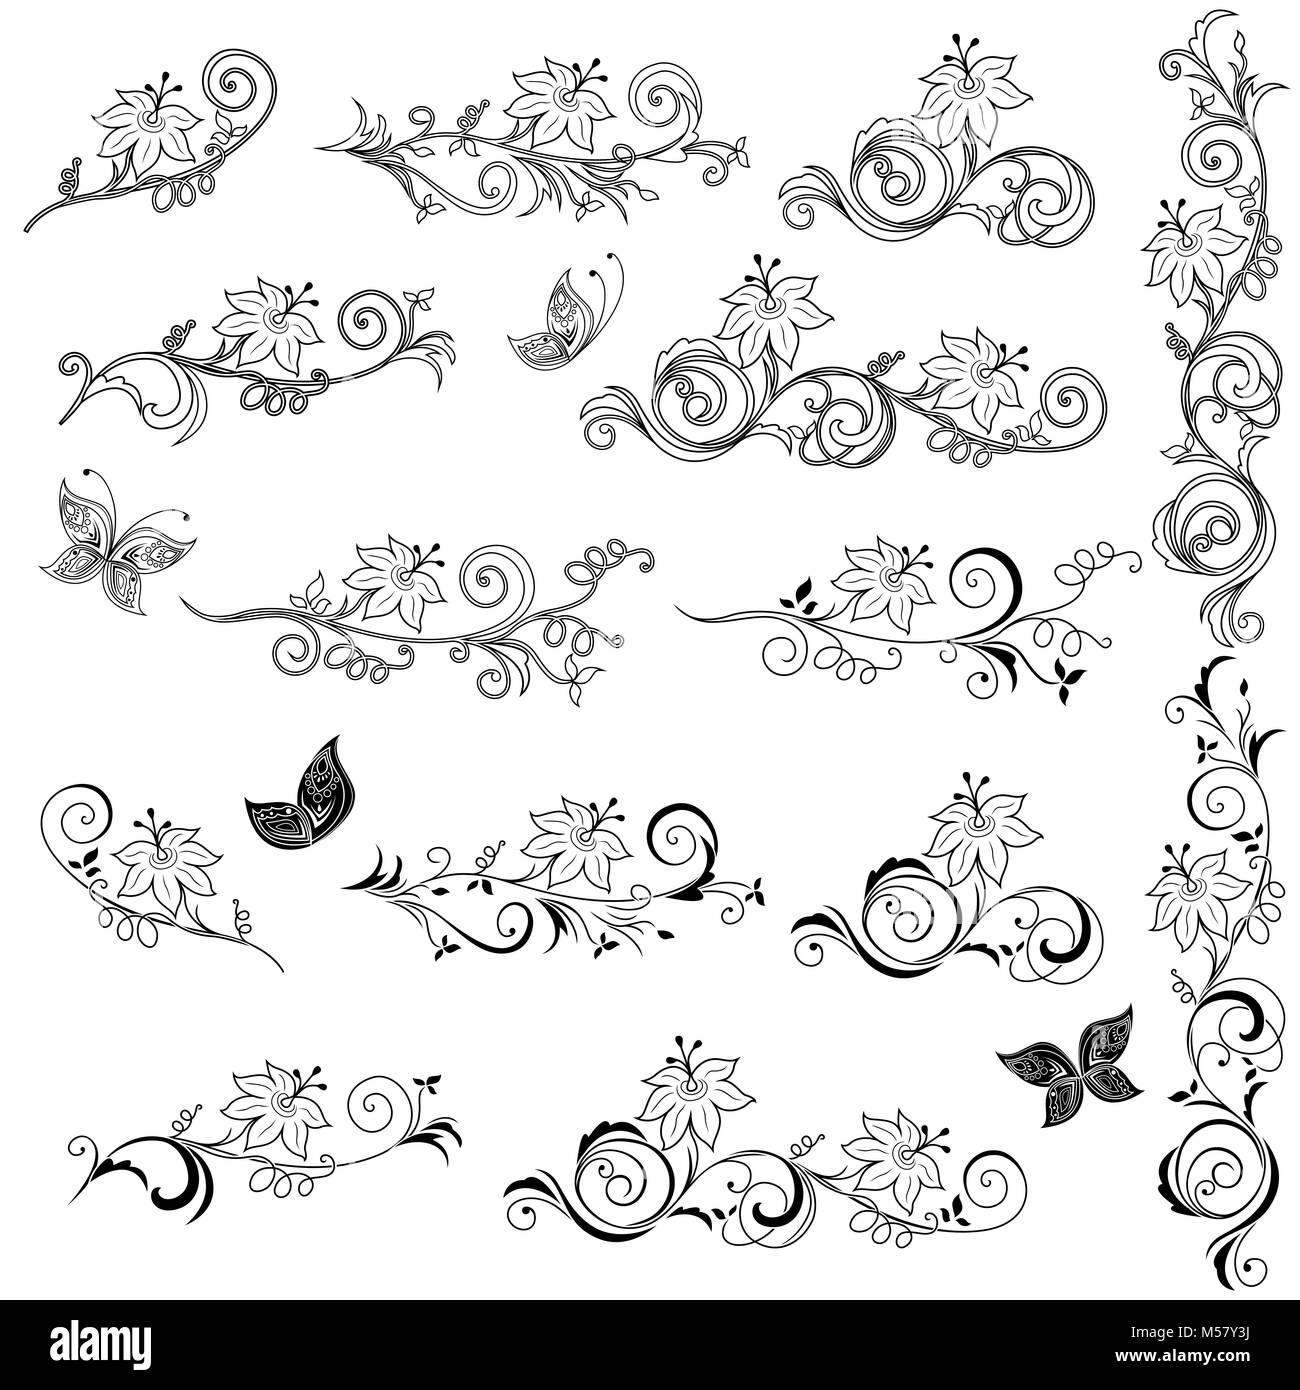 Set of ornamental design elements with leaves, flowers and butterflies, vector illustration Stock Vector